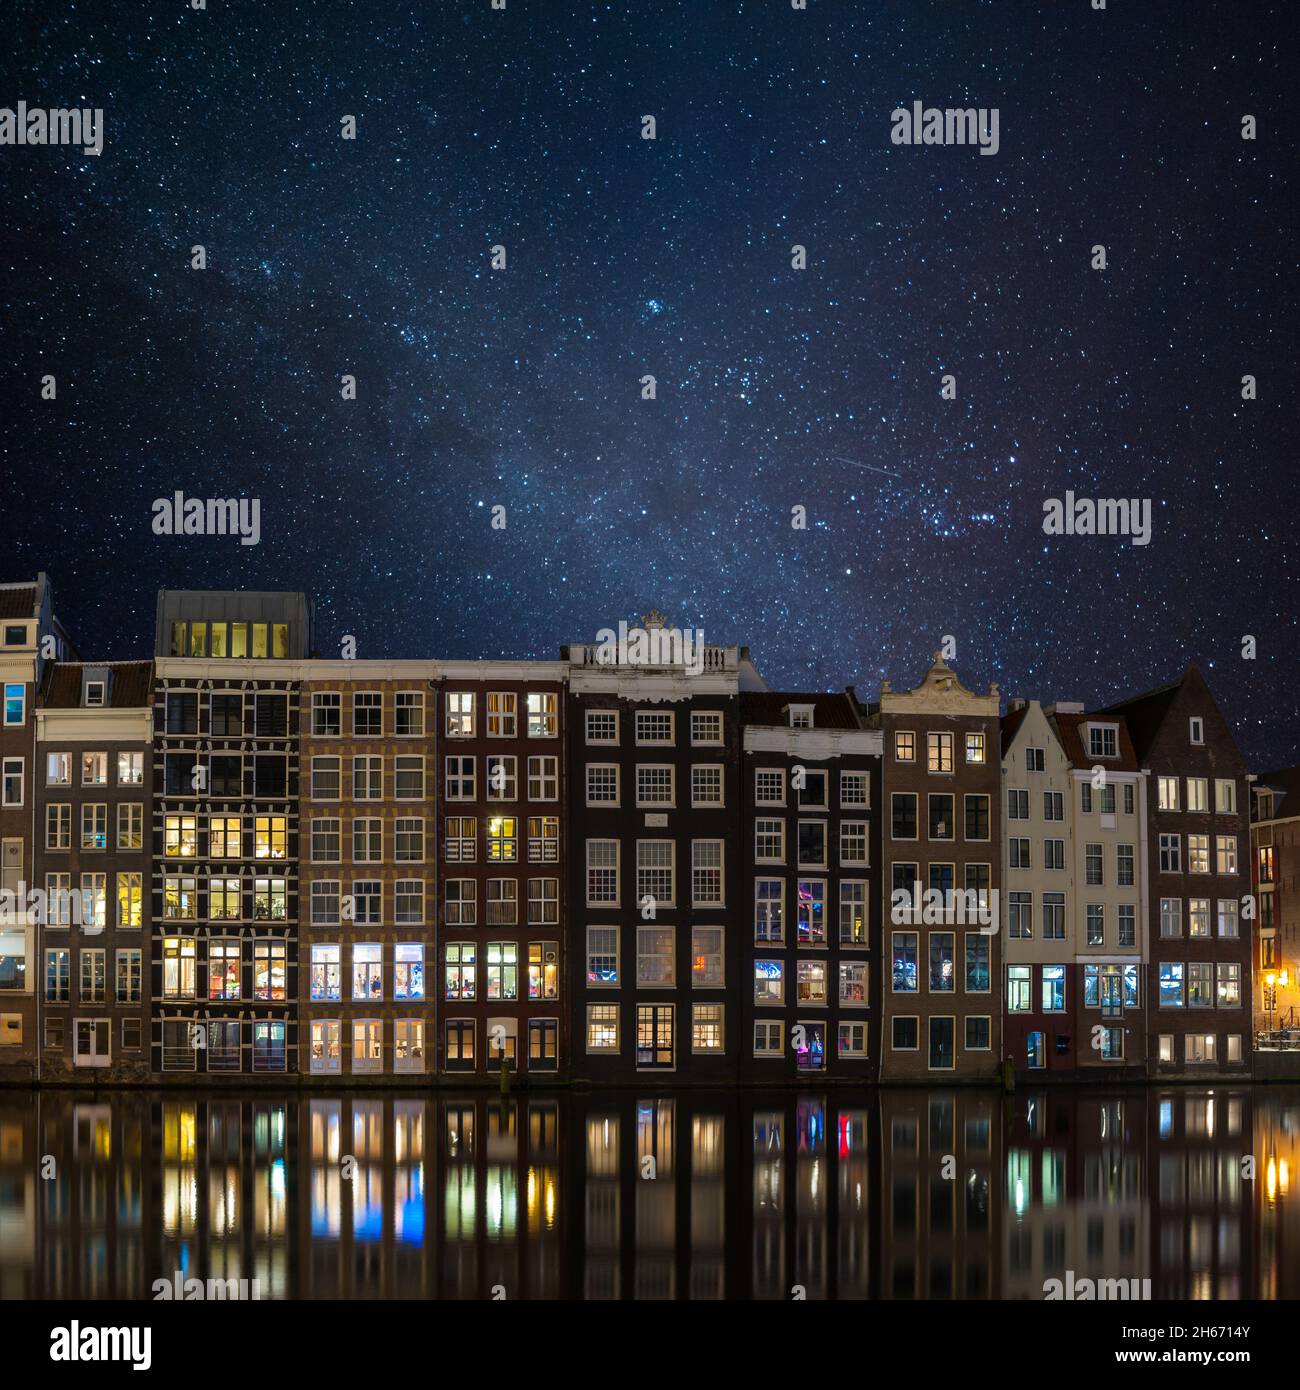 Night landscape with famous houses in Amsterdam, stars in sky and reflection in water, cityscape Stock Photo